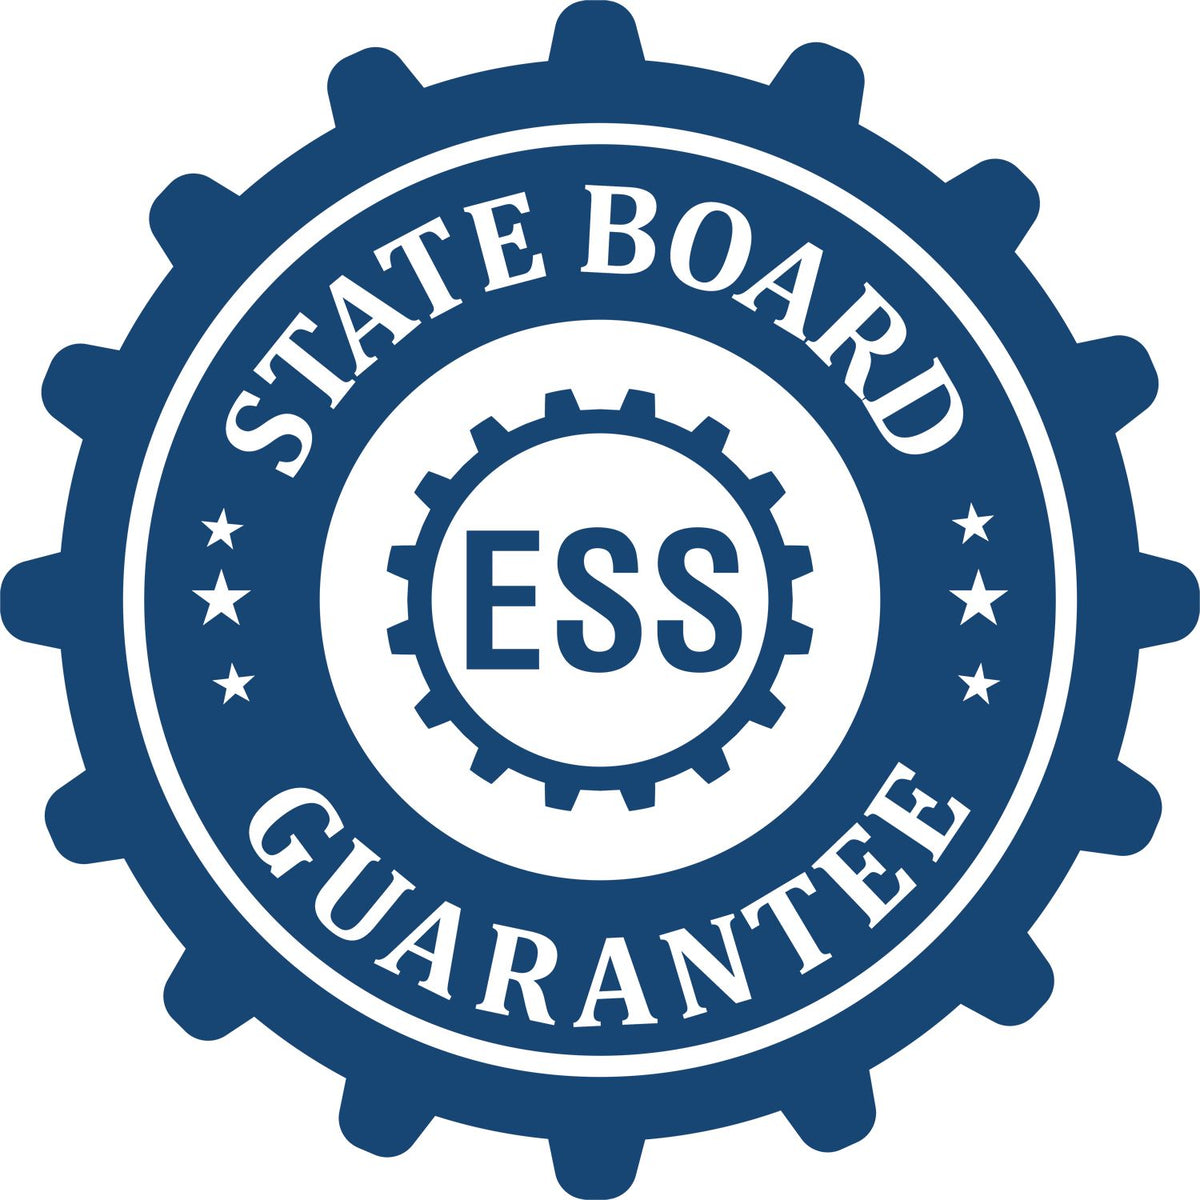 An emblem in a gear shape illustrating a state board guarantee for the Hybrid Kentucky Architect Seal